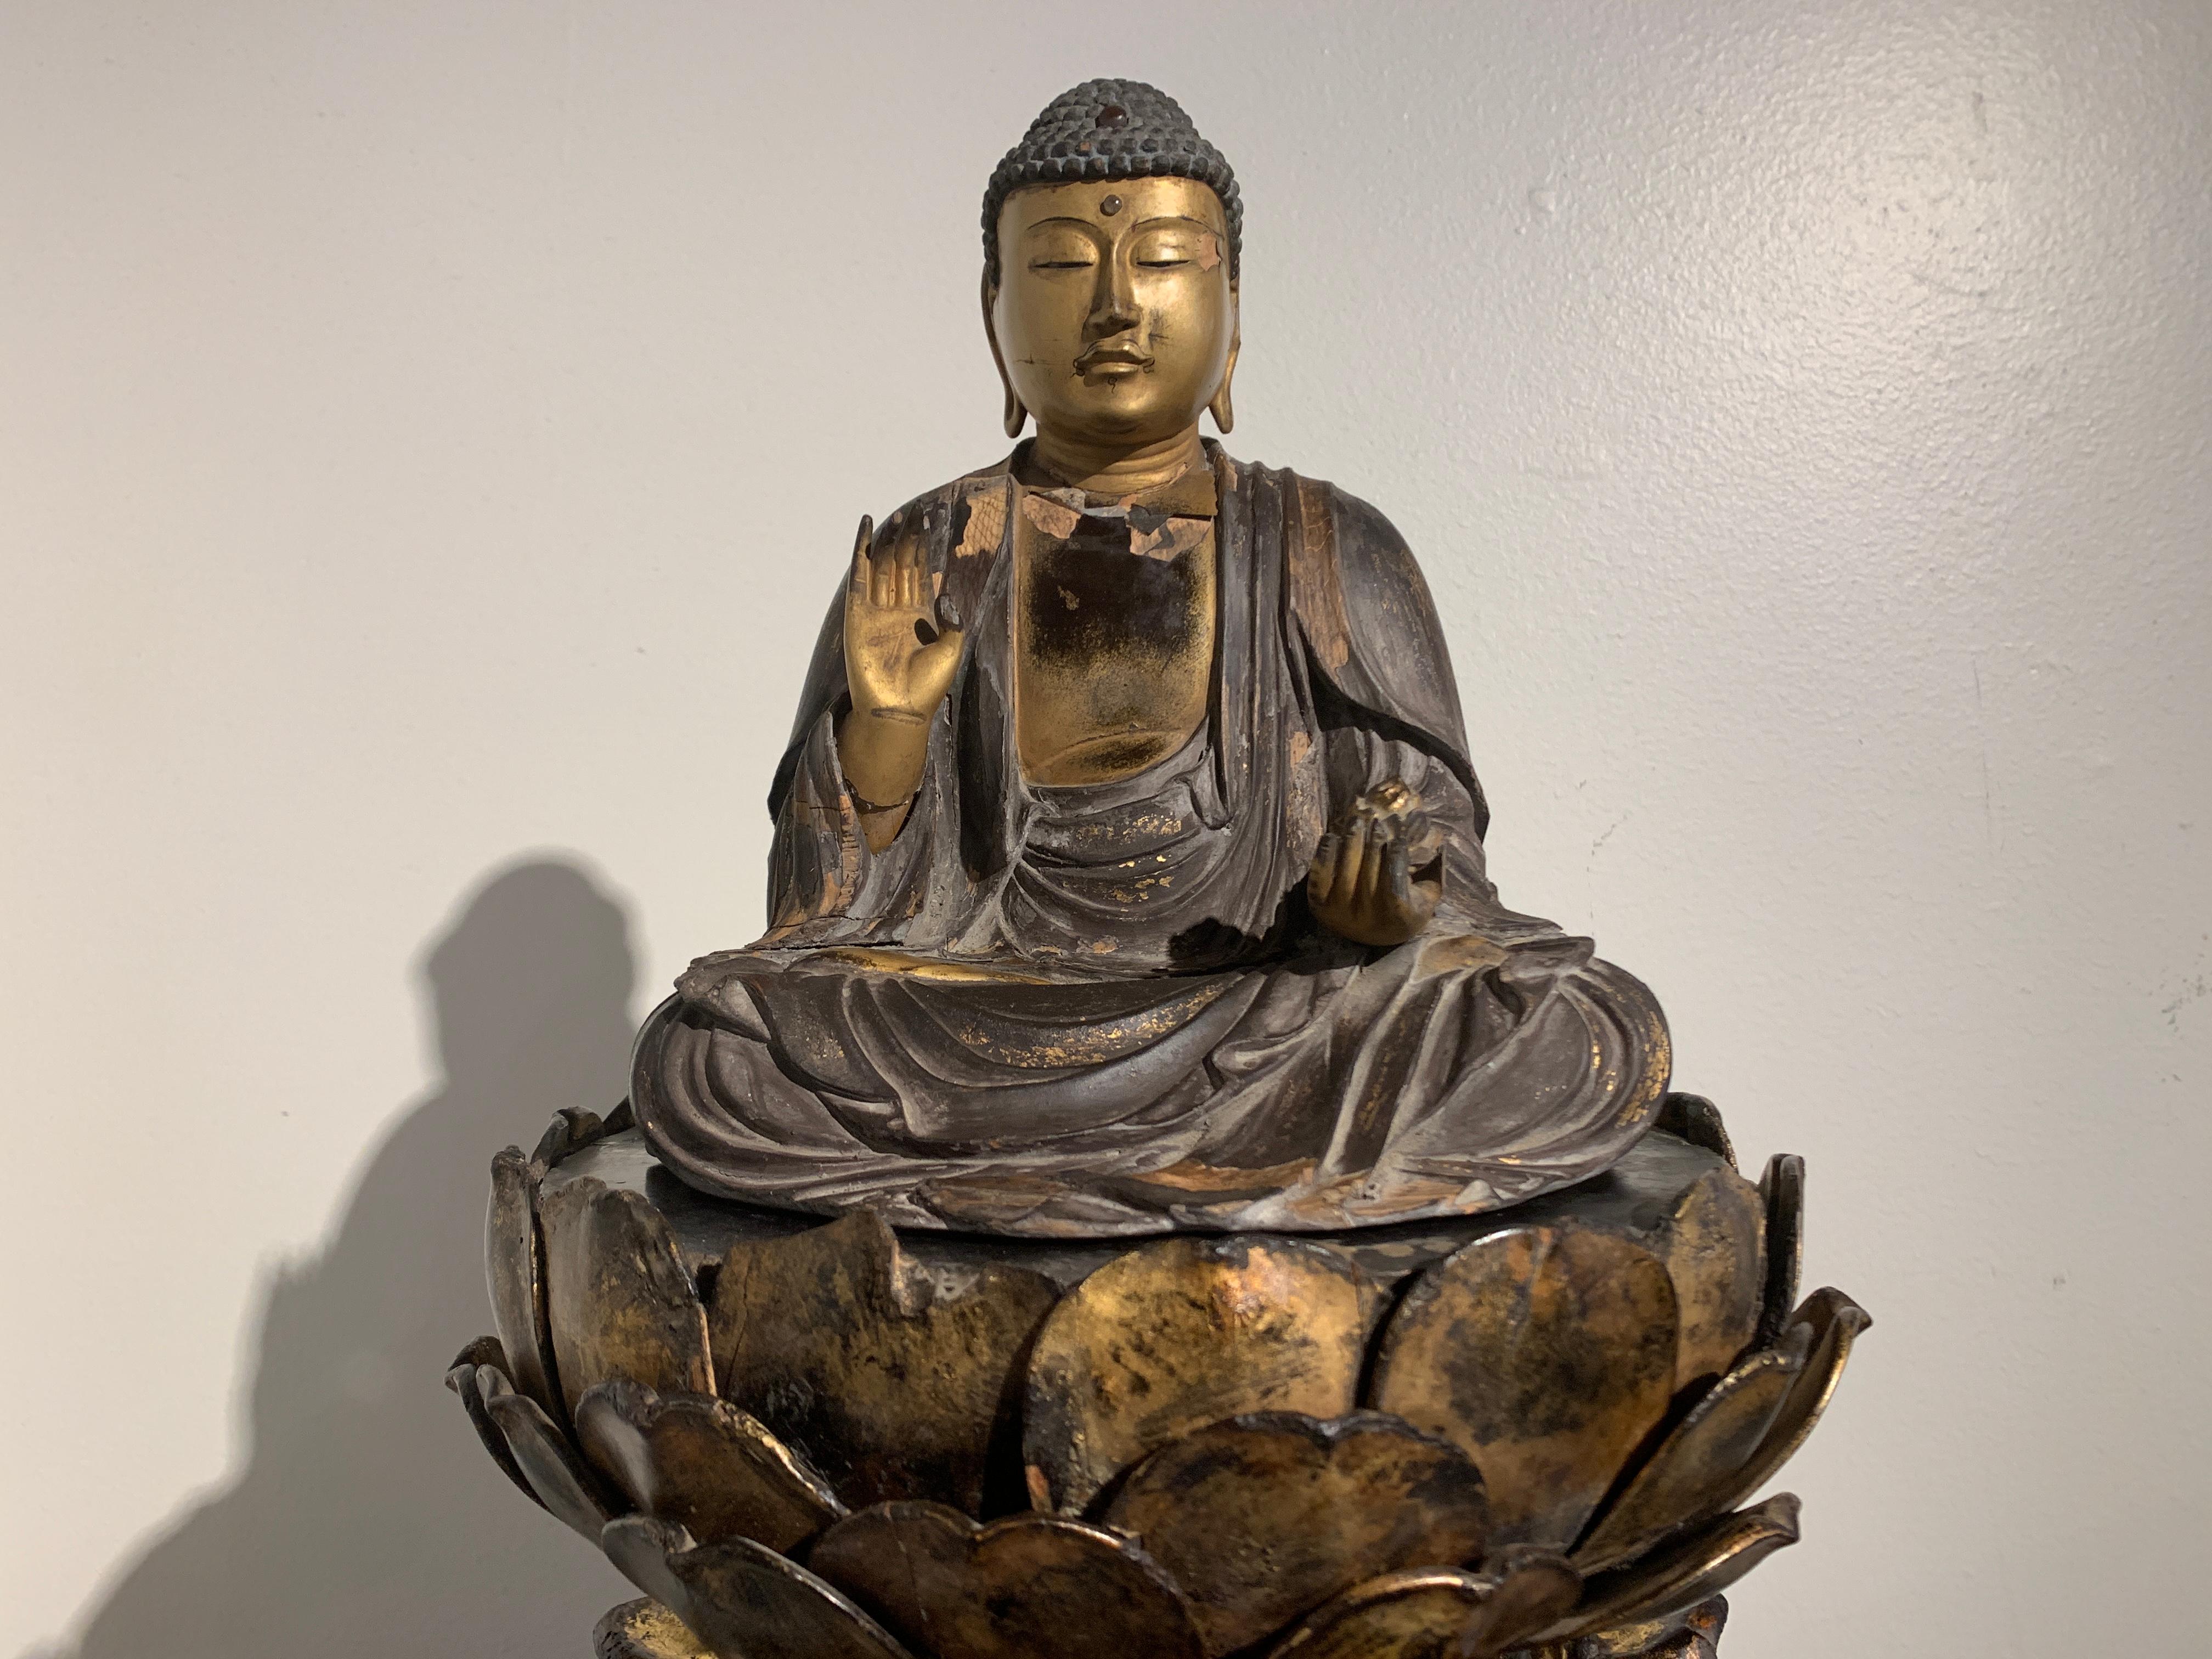 A striking Japanese late Muromachi Period (1333-1573) lacquered and giltwood figure of Yakushi Nyorai, the Medicine Buddha, seated upon an elaborate carved openwork lotus pedestal, Japan, mid-16th century.

The Medicine Buddha, known as Yakushi